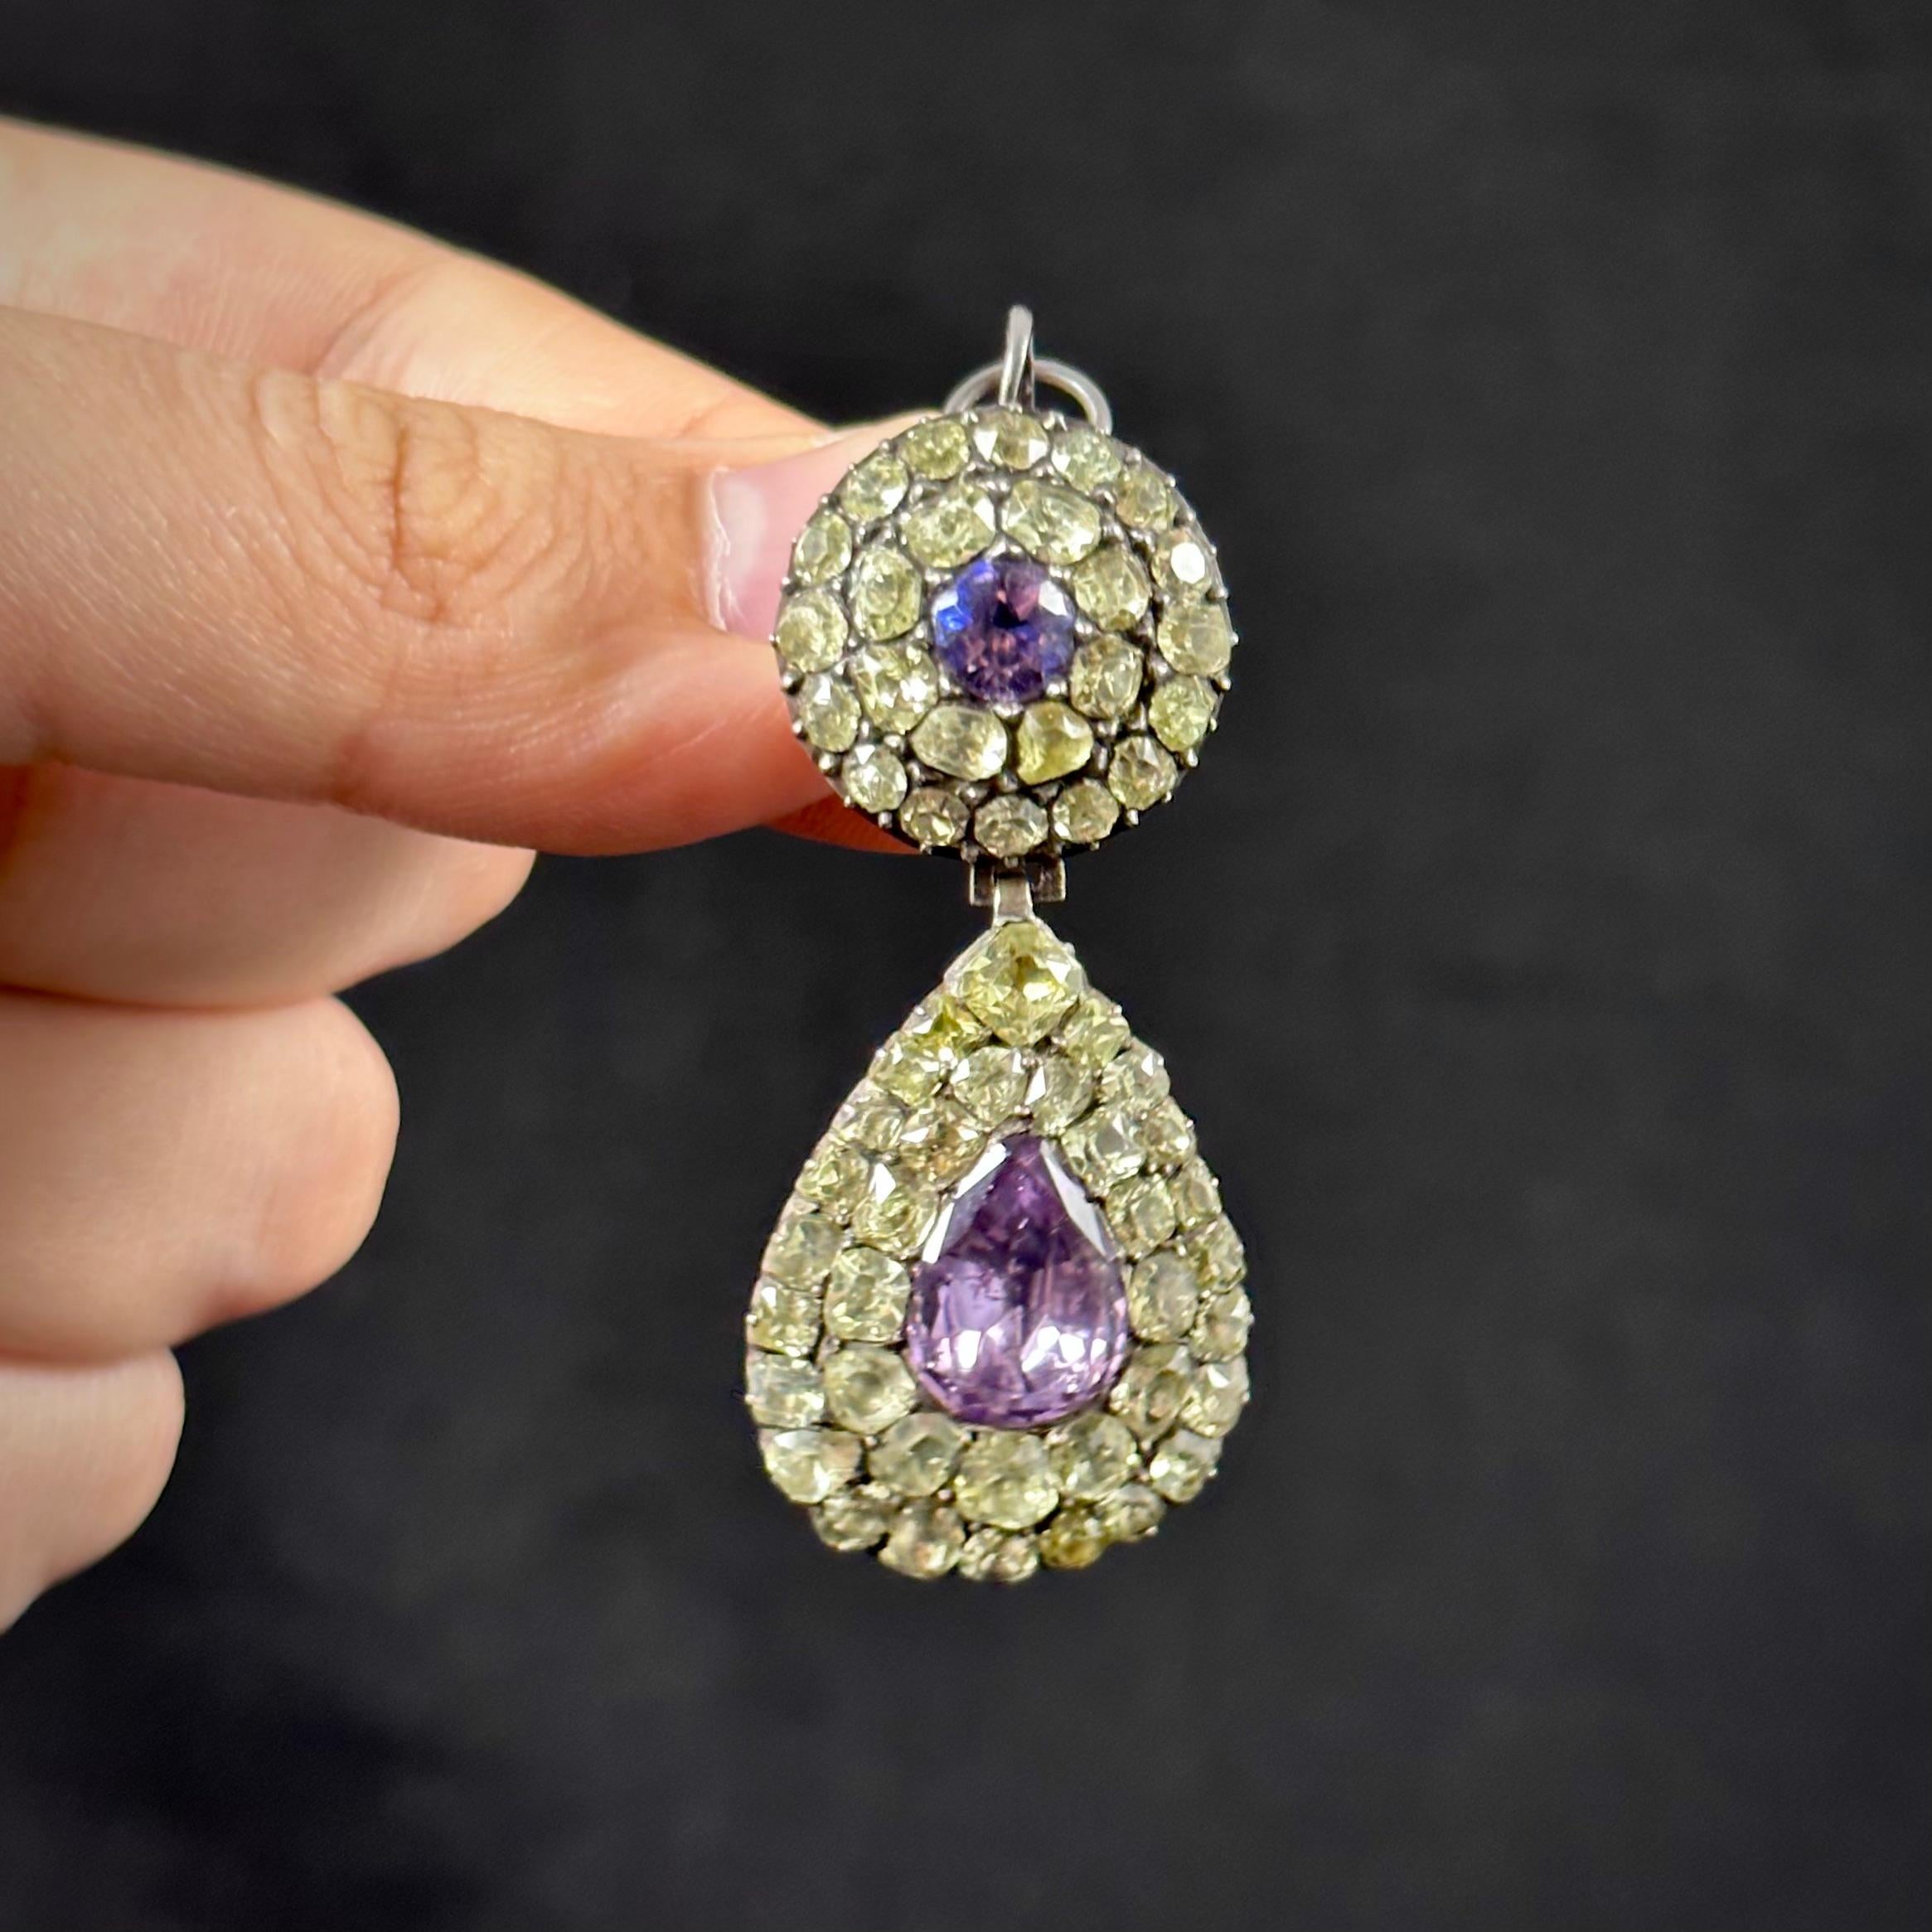 Antique Chrysolite Chrysoberyl Amethyst Brooch Earrings Silver Set Portuguese For Sale 7